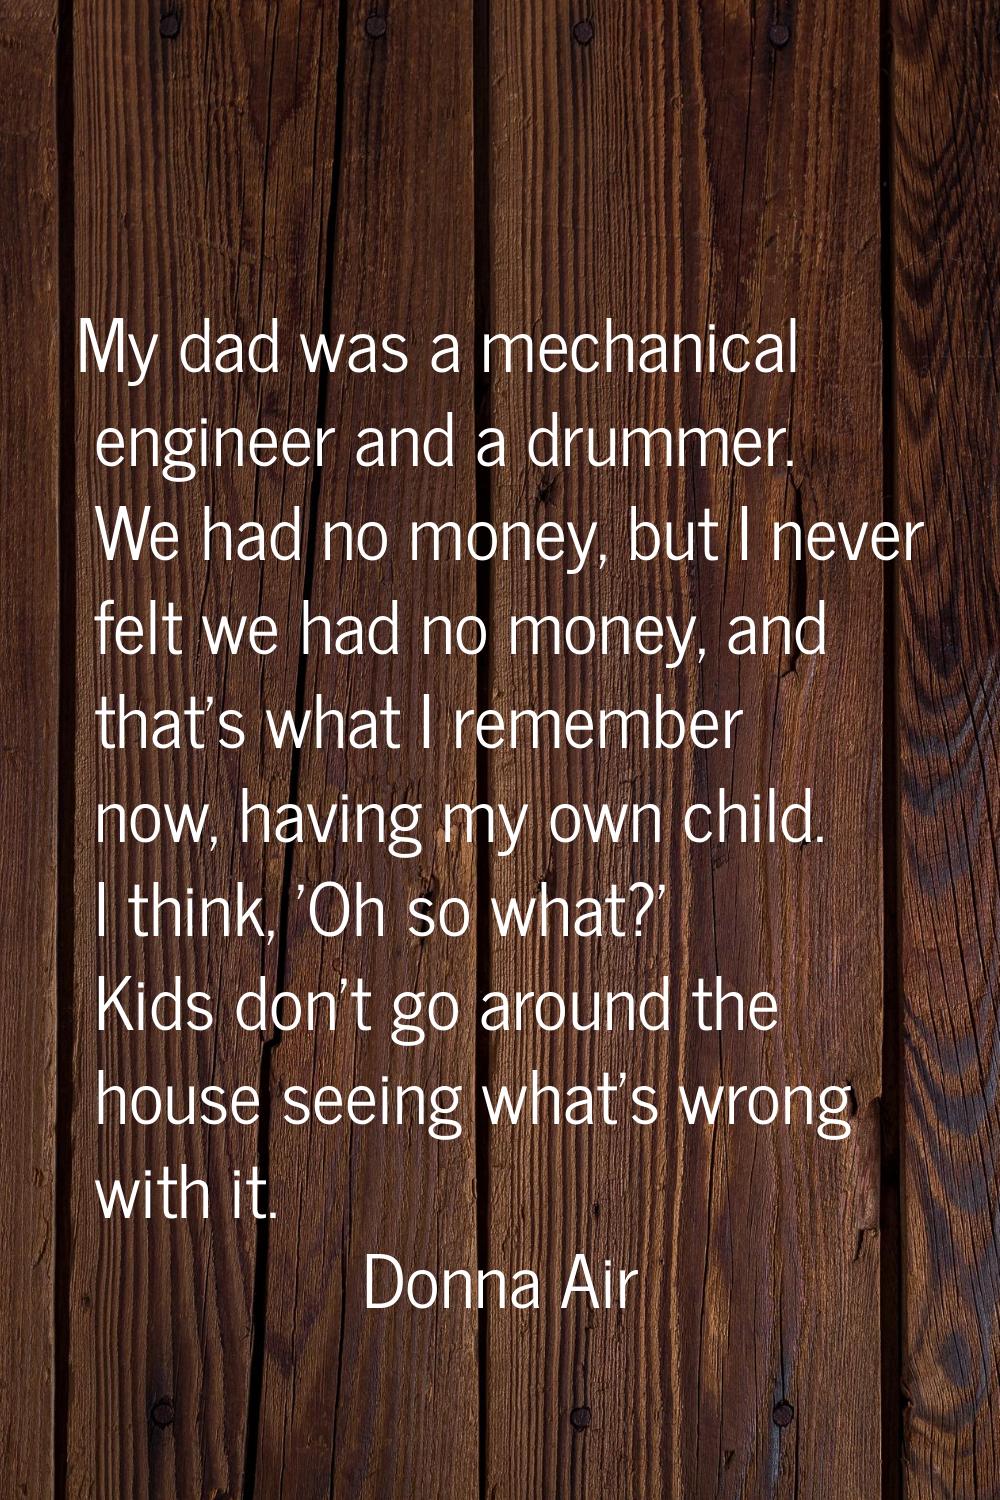 My dad was a mechanical engineer and a drummer. We had no money, but I never felt we had no money, 